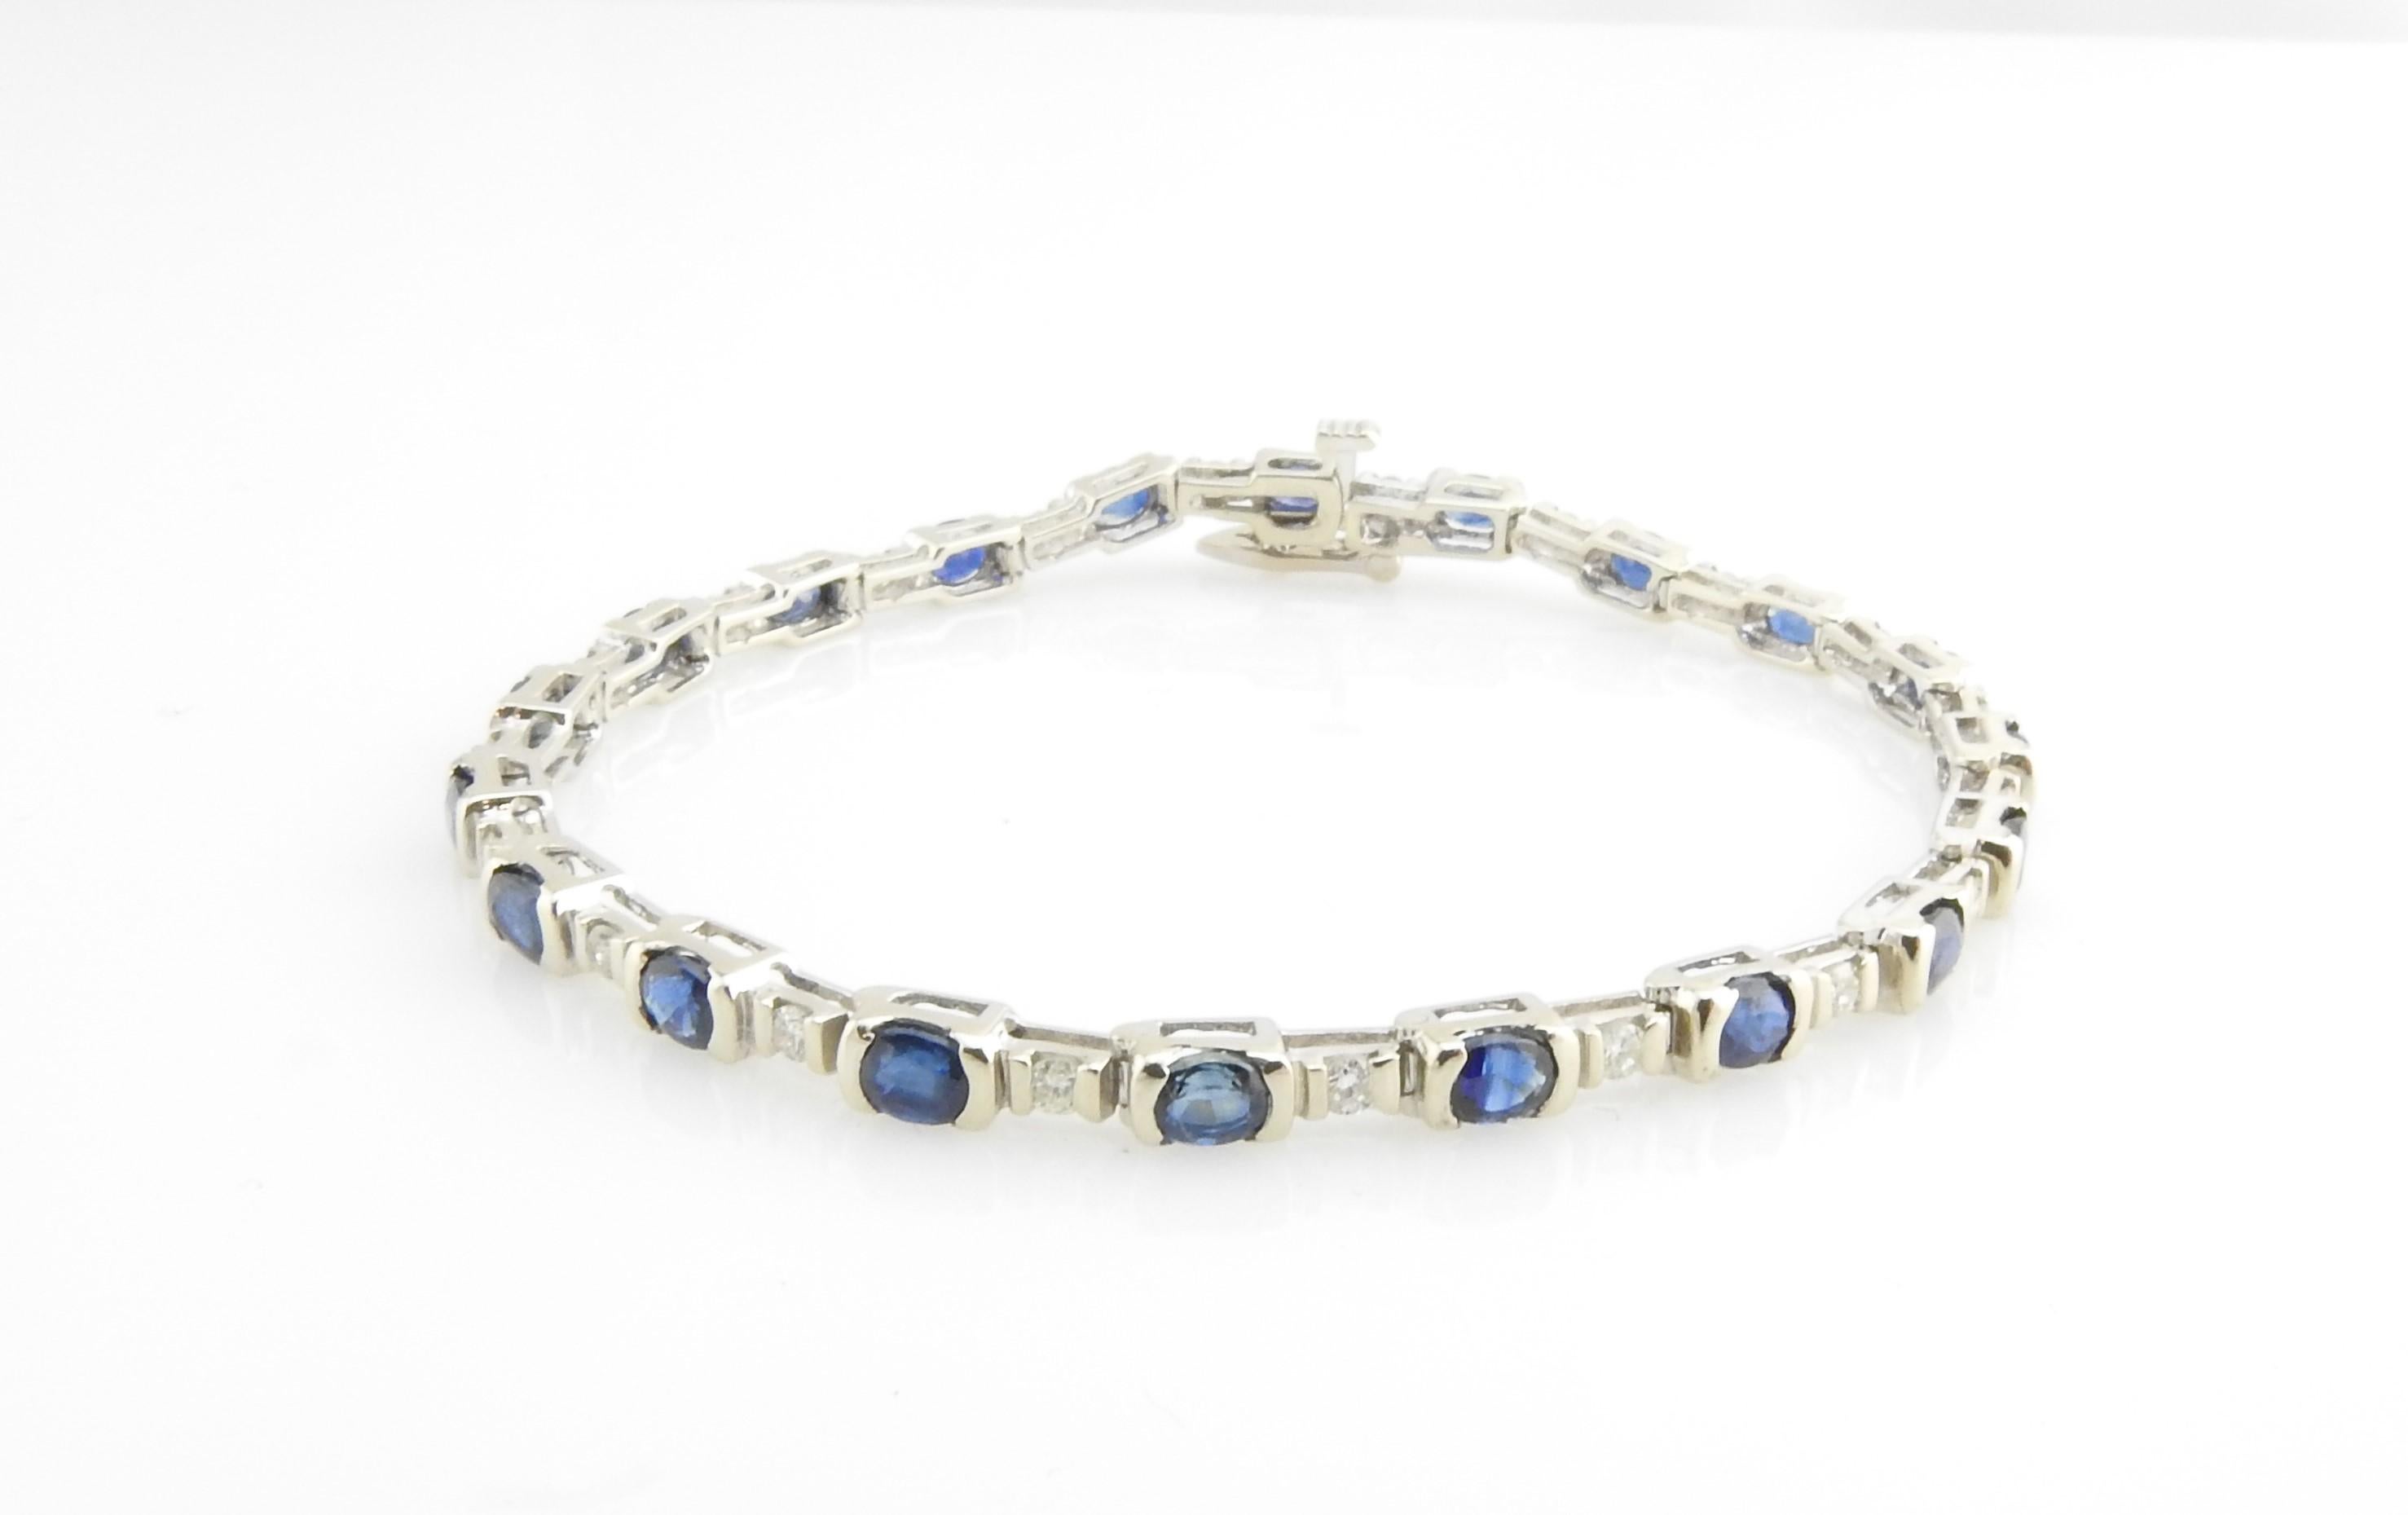 Vintage 14 Karat White Gold Sapphire and Diamond Bracelet

This elegant bracelet features 20 round sapphires (3 mm each) and 20 round brilliant cut diamonds set in classic 14K white gold. Safety closure.

Approximate total diamond weight: .60